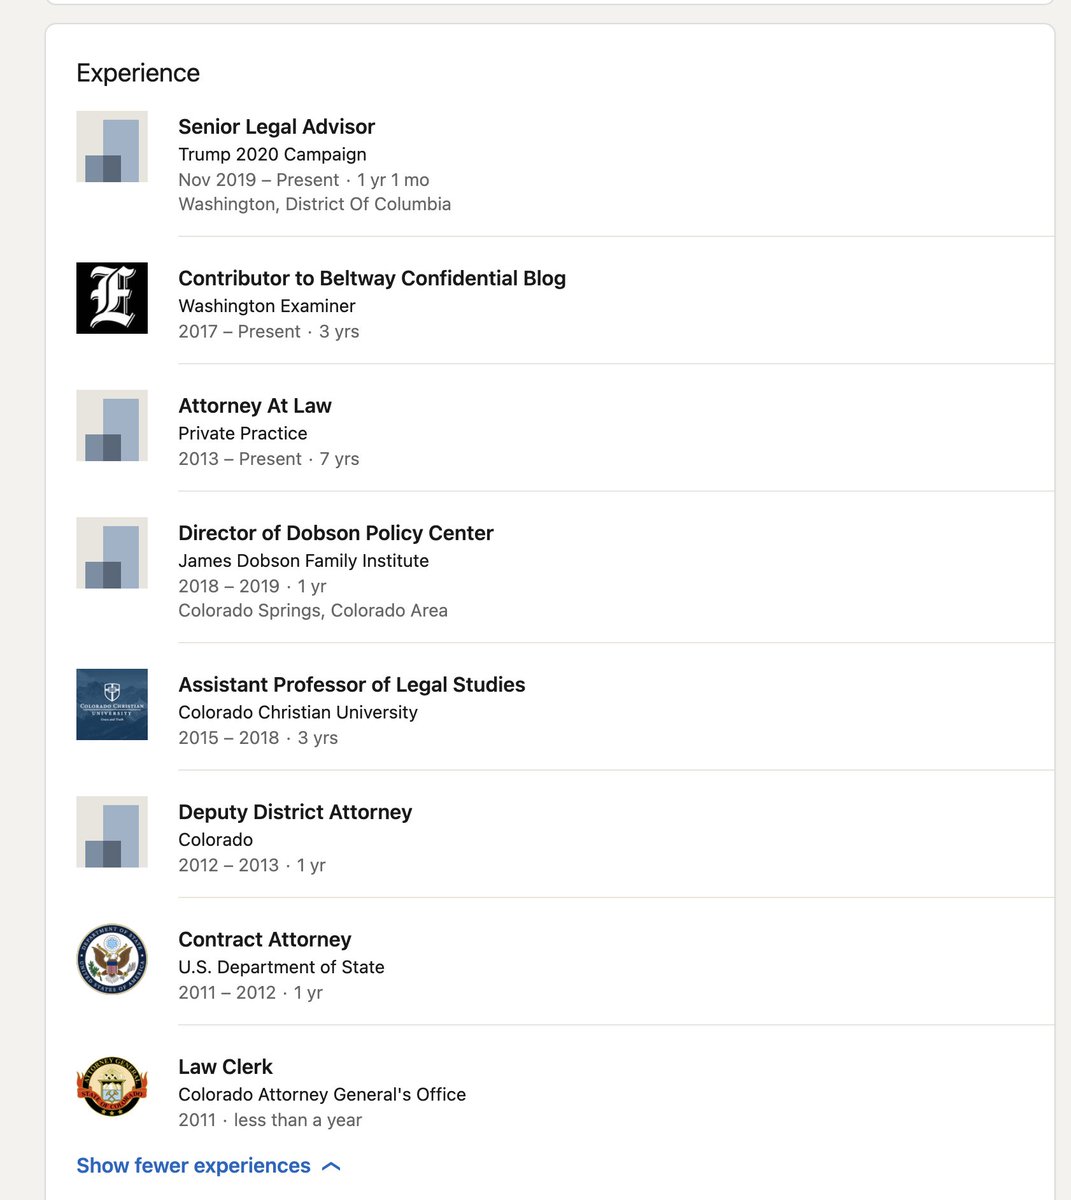 This is  @JennaEllisEsq's job history on linkedin. can anyone spot an actual job? Note Colorado Christian University does not appear to have a law school and "Colorado" does not appear to have Deputy District Attorneys.